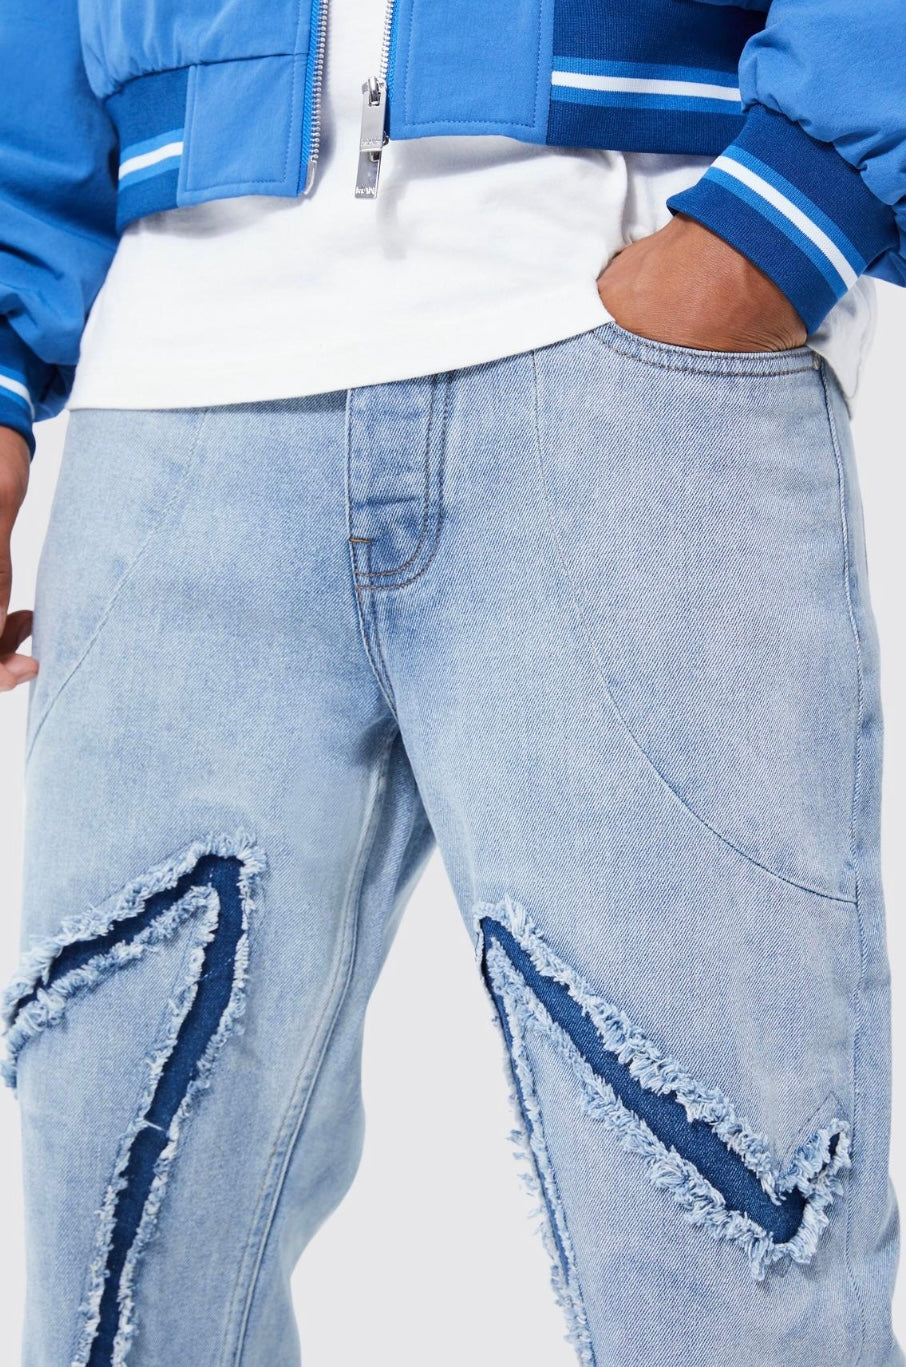 Jeans with ripped pattern